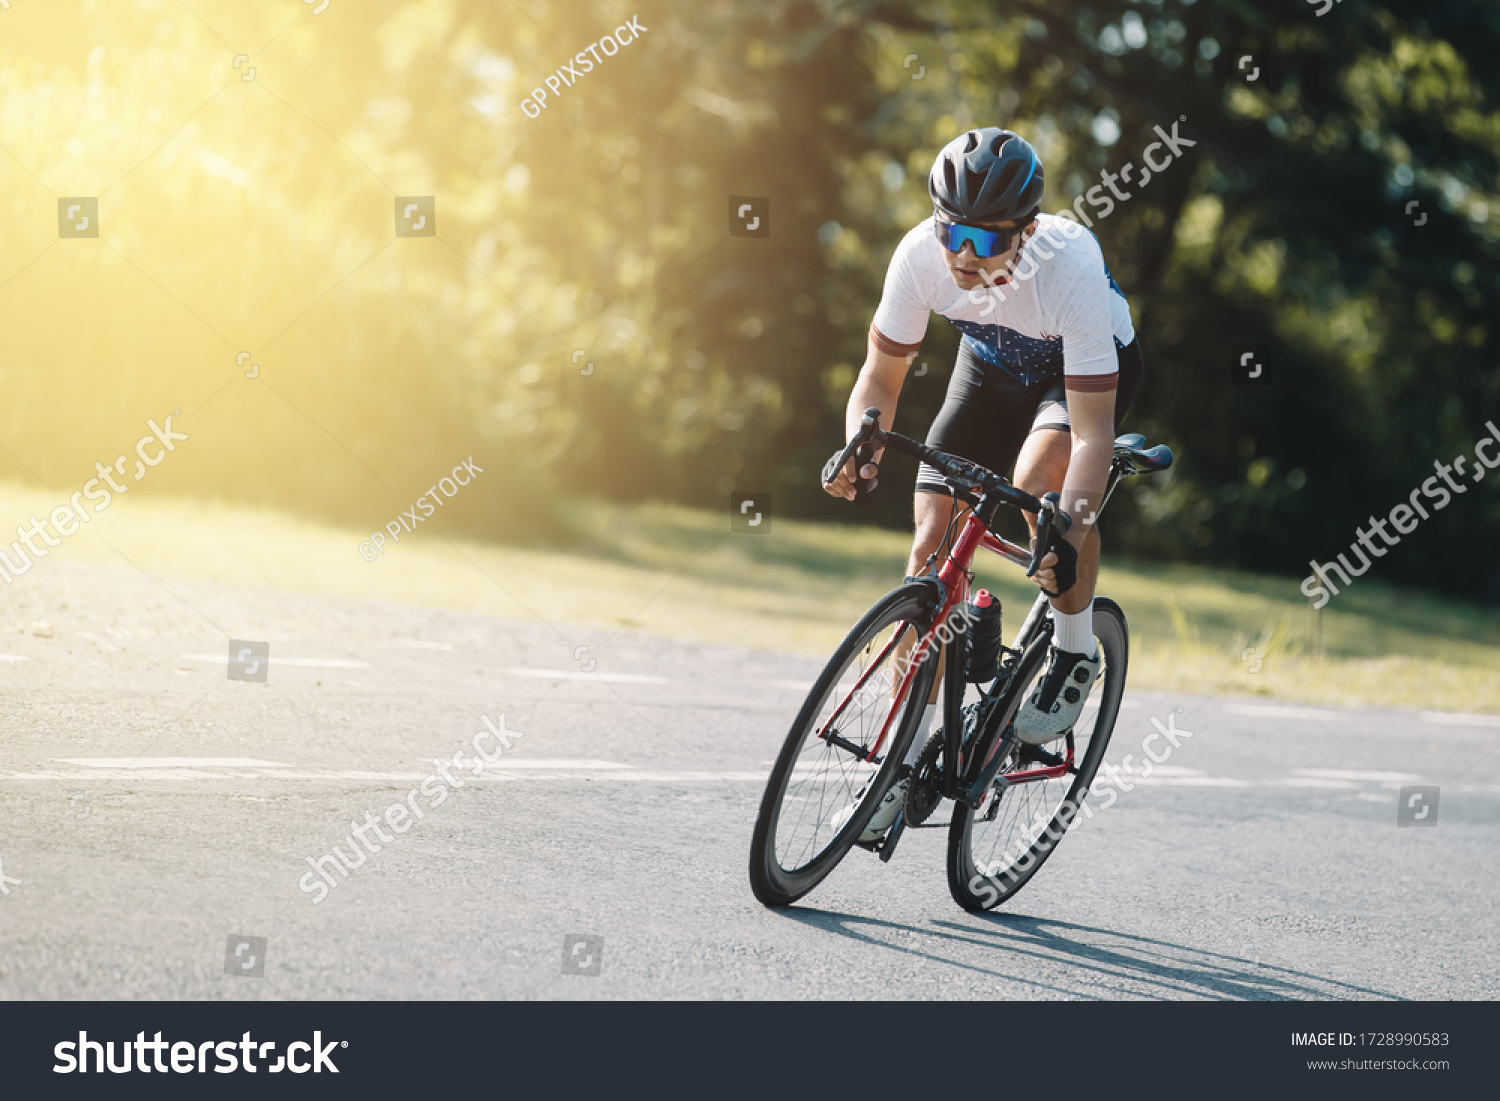 Cyclist pedaling on a racing bike outdoors in sun set .The image of cyclist in motion on the background in the evening. #1728990583